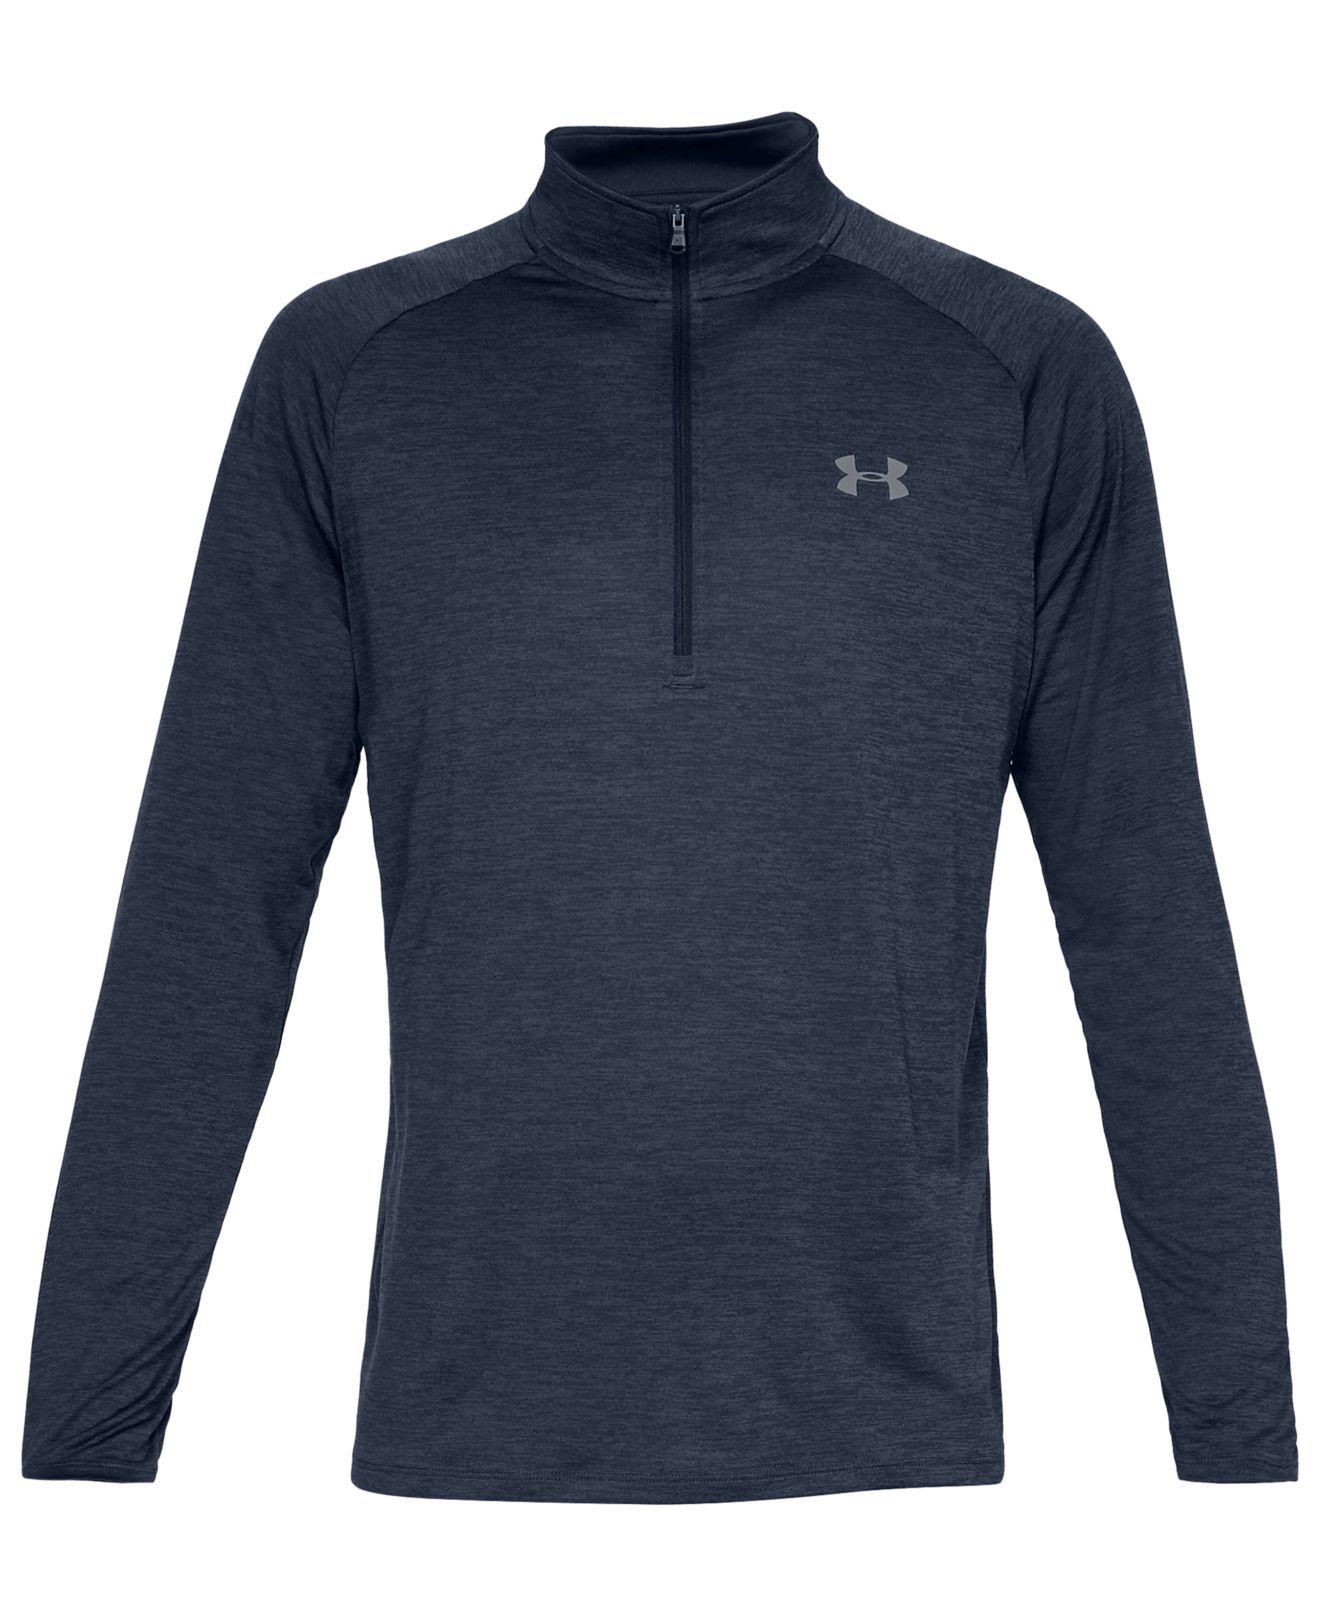 Lyst - Under Armour Ua Tech Half-zip Pullover in Blue for Men